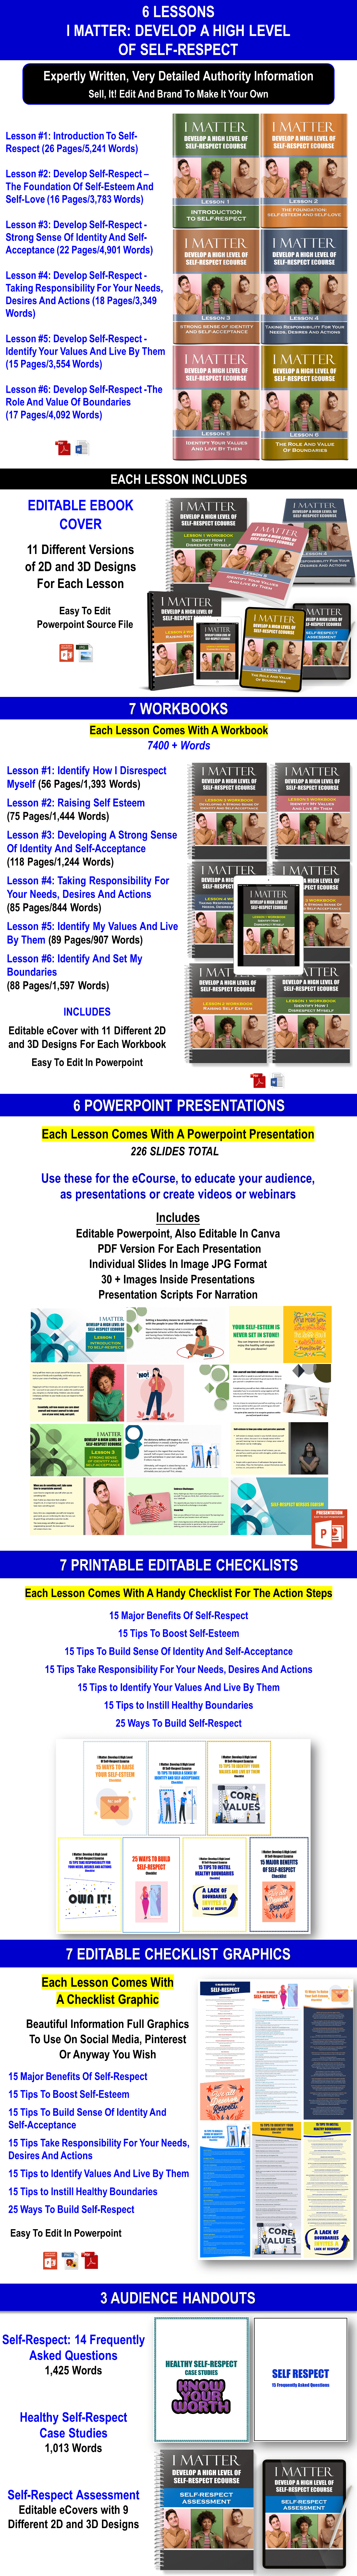 6 Part eCourse: I Matter: Develop A High Level Of Self-Respect Giant Content Pack with PLR Rights